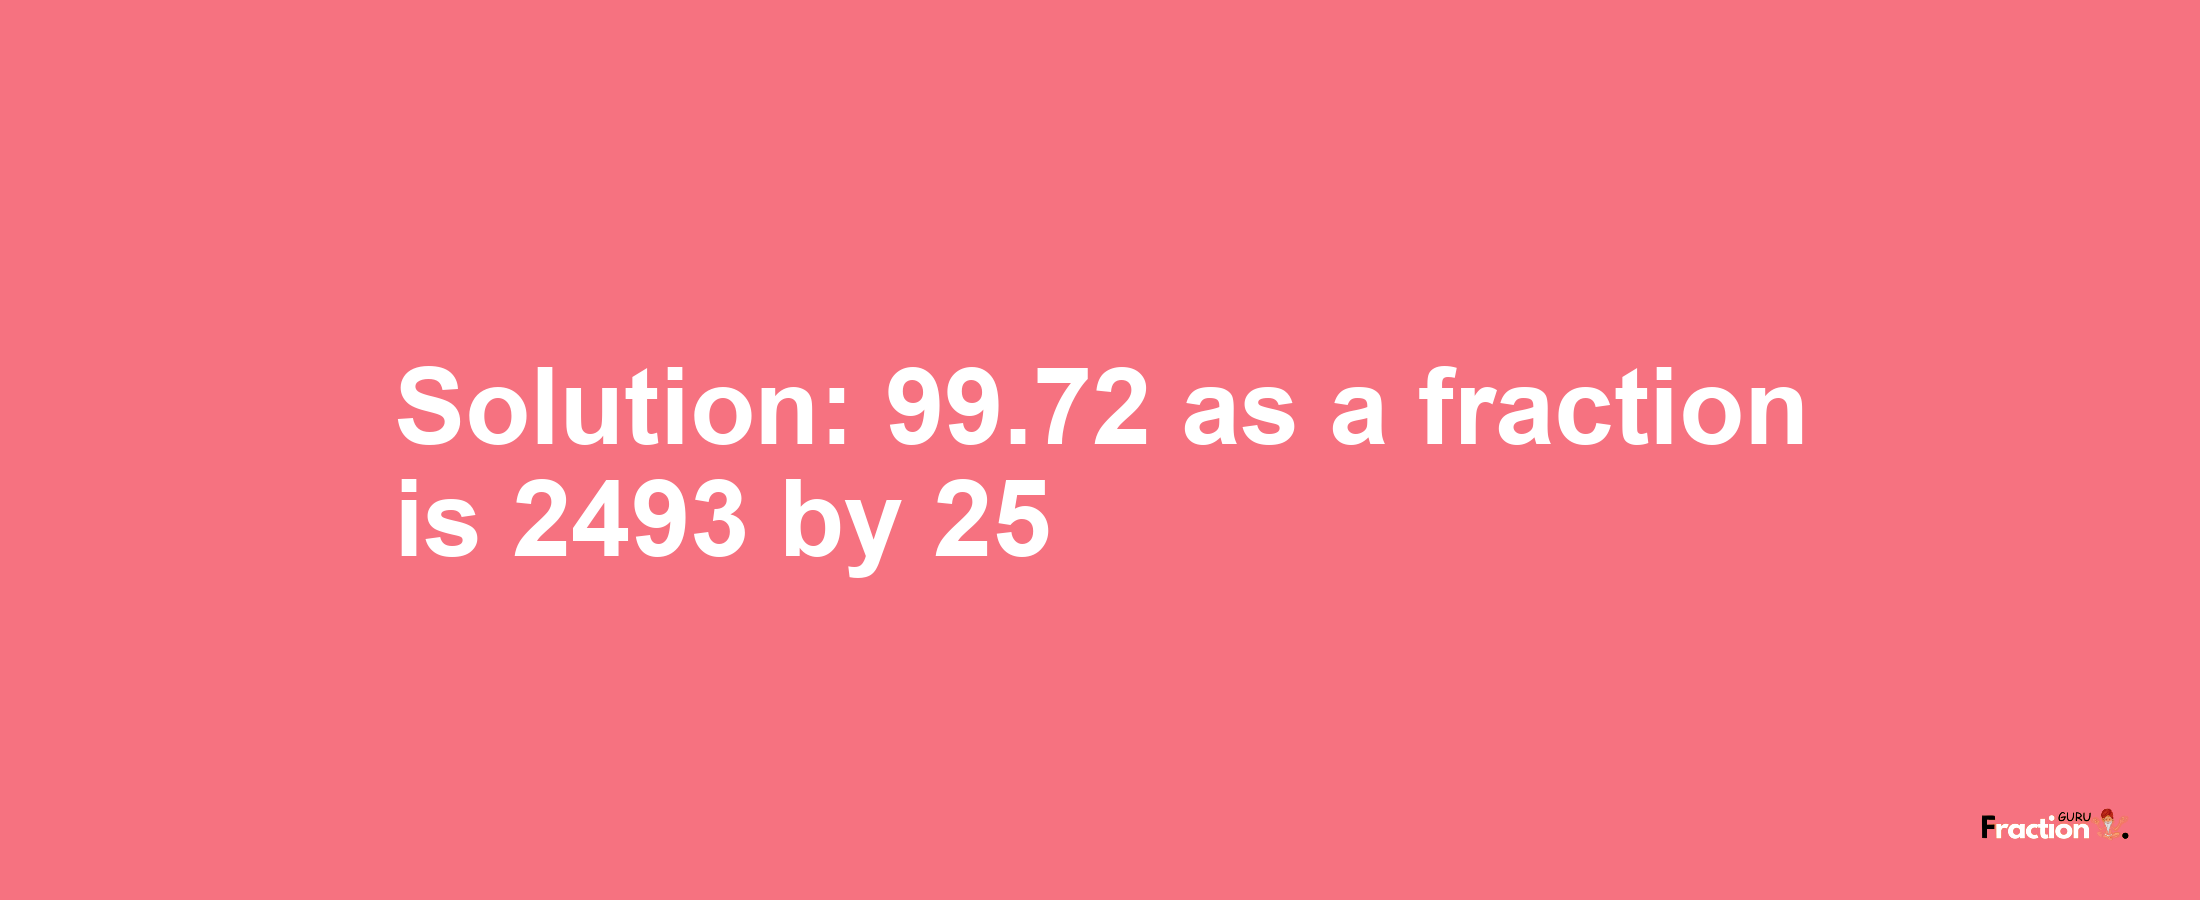 Solution:99.72 as a fraction is 2493/25